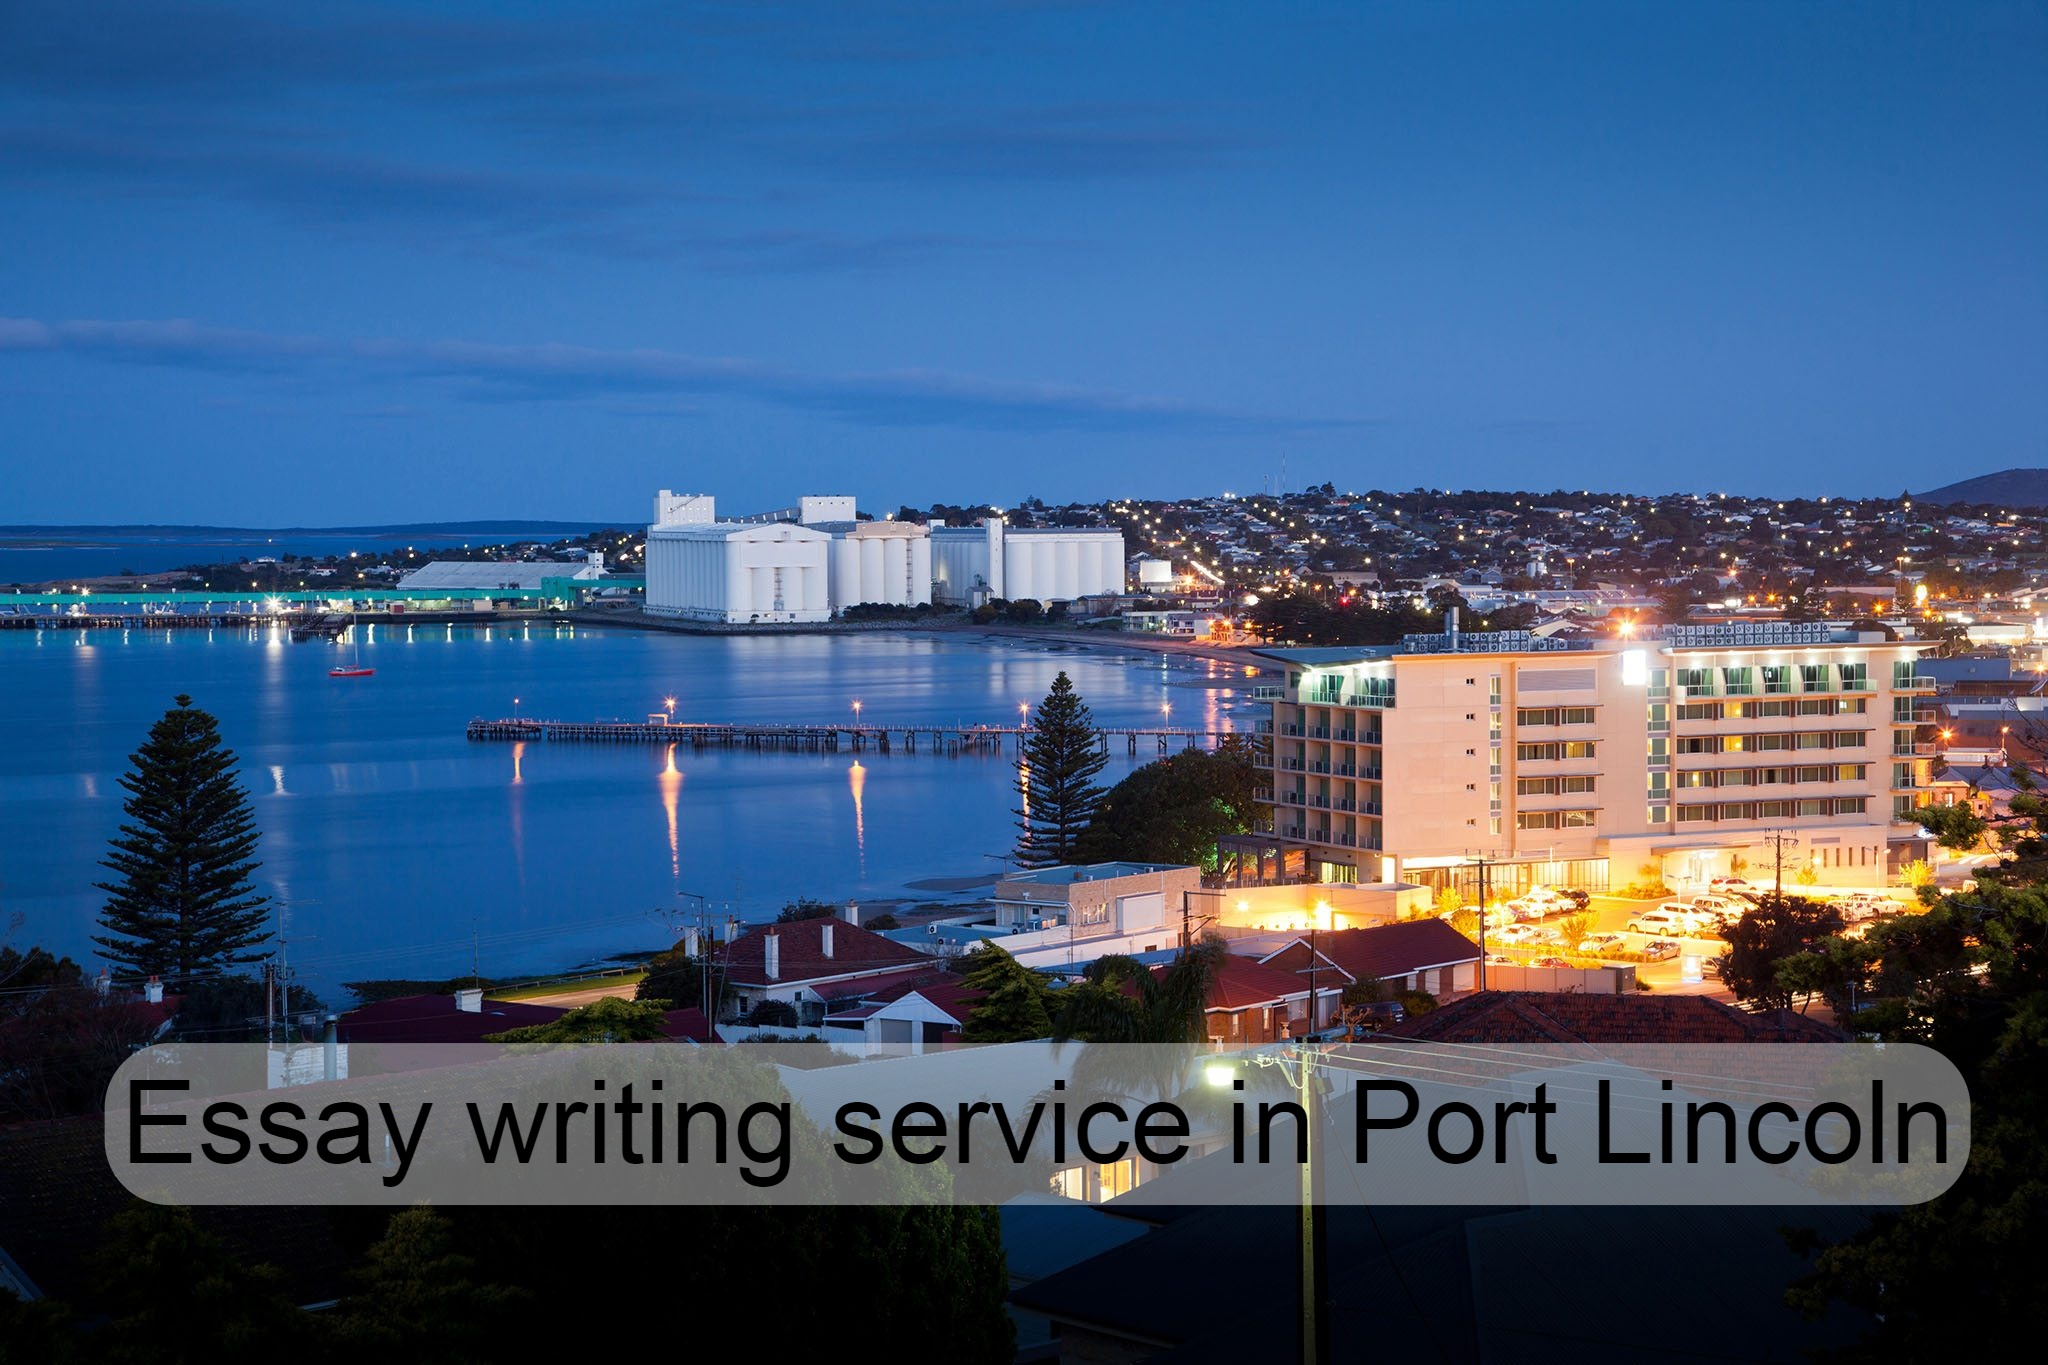 Essay writing service in Port Lincoln